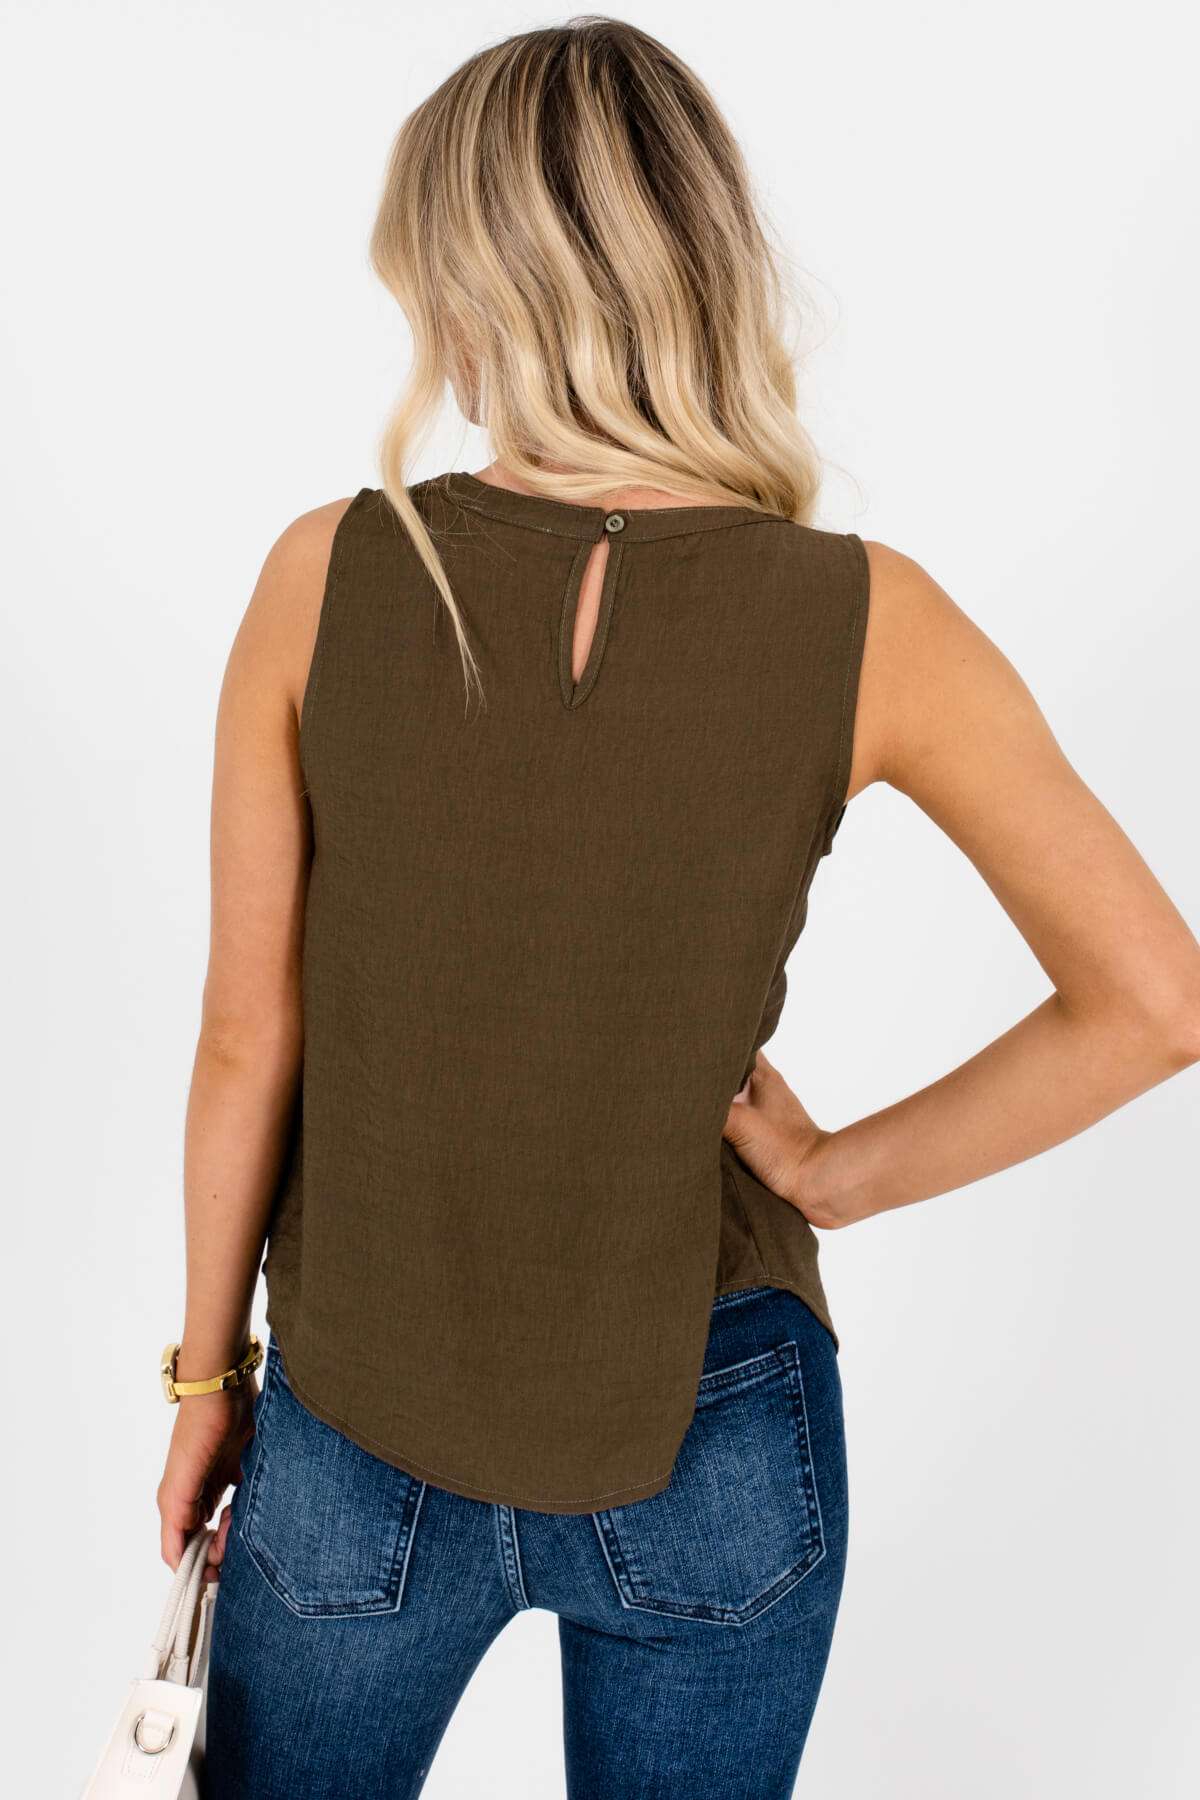 Olive Green Cutout Neckline Tank Tops Affordable Online Boutique